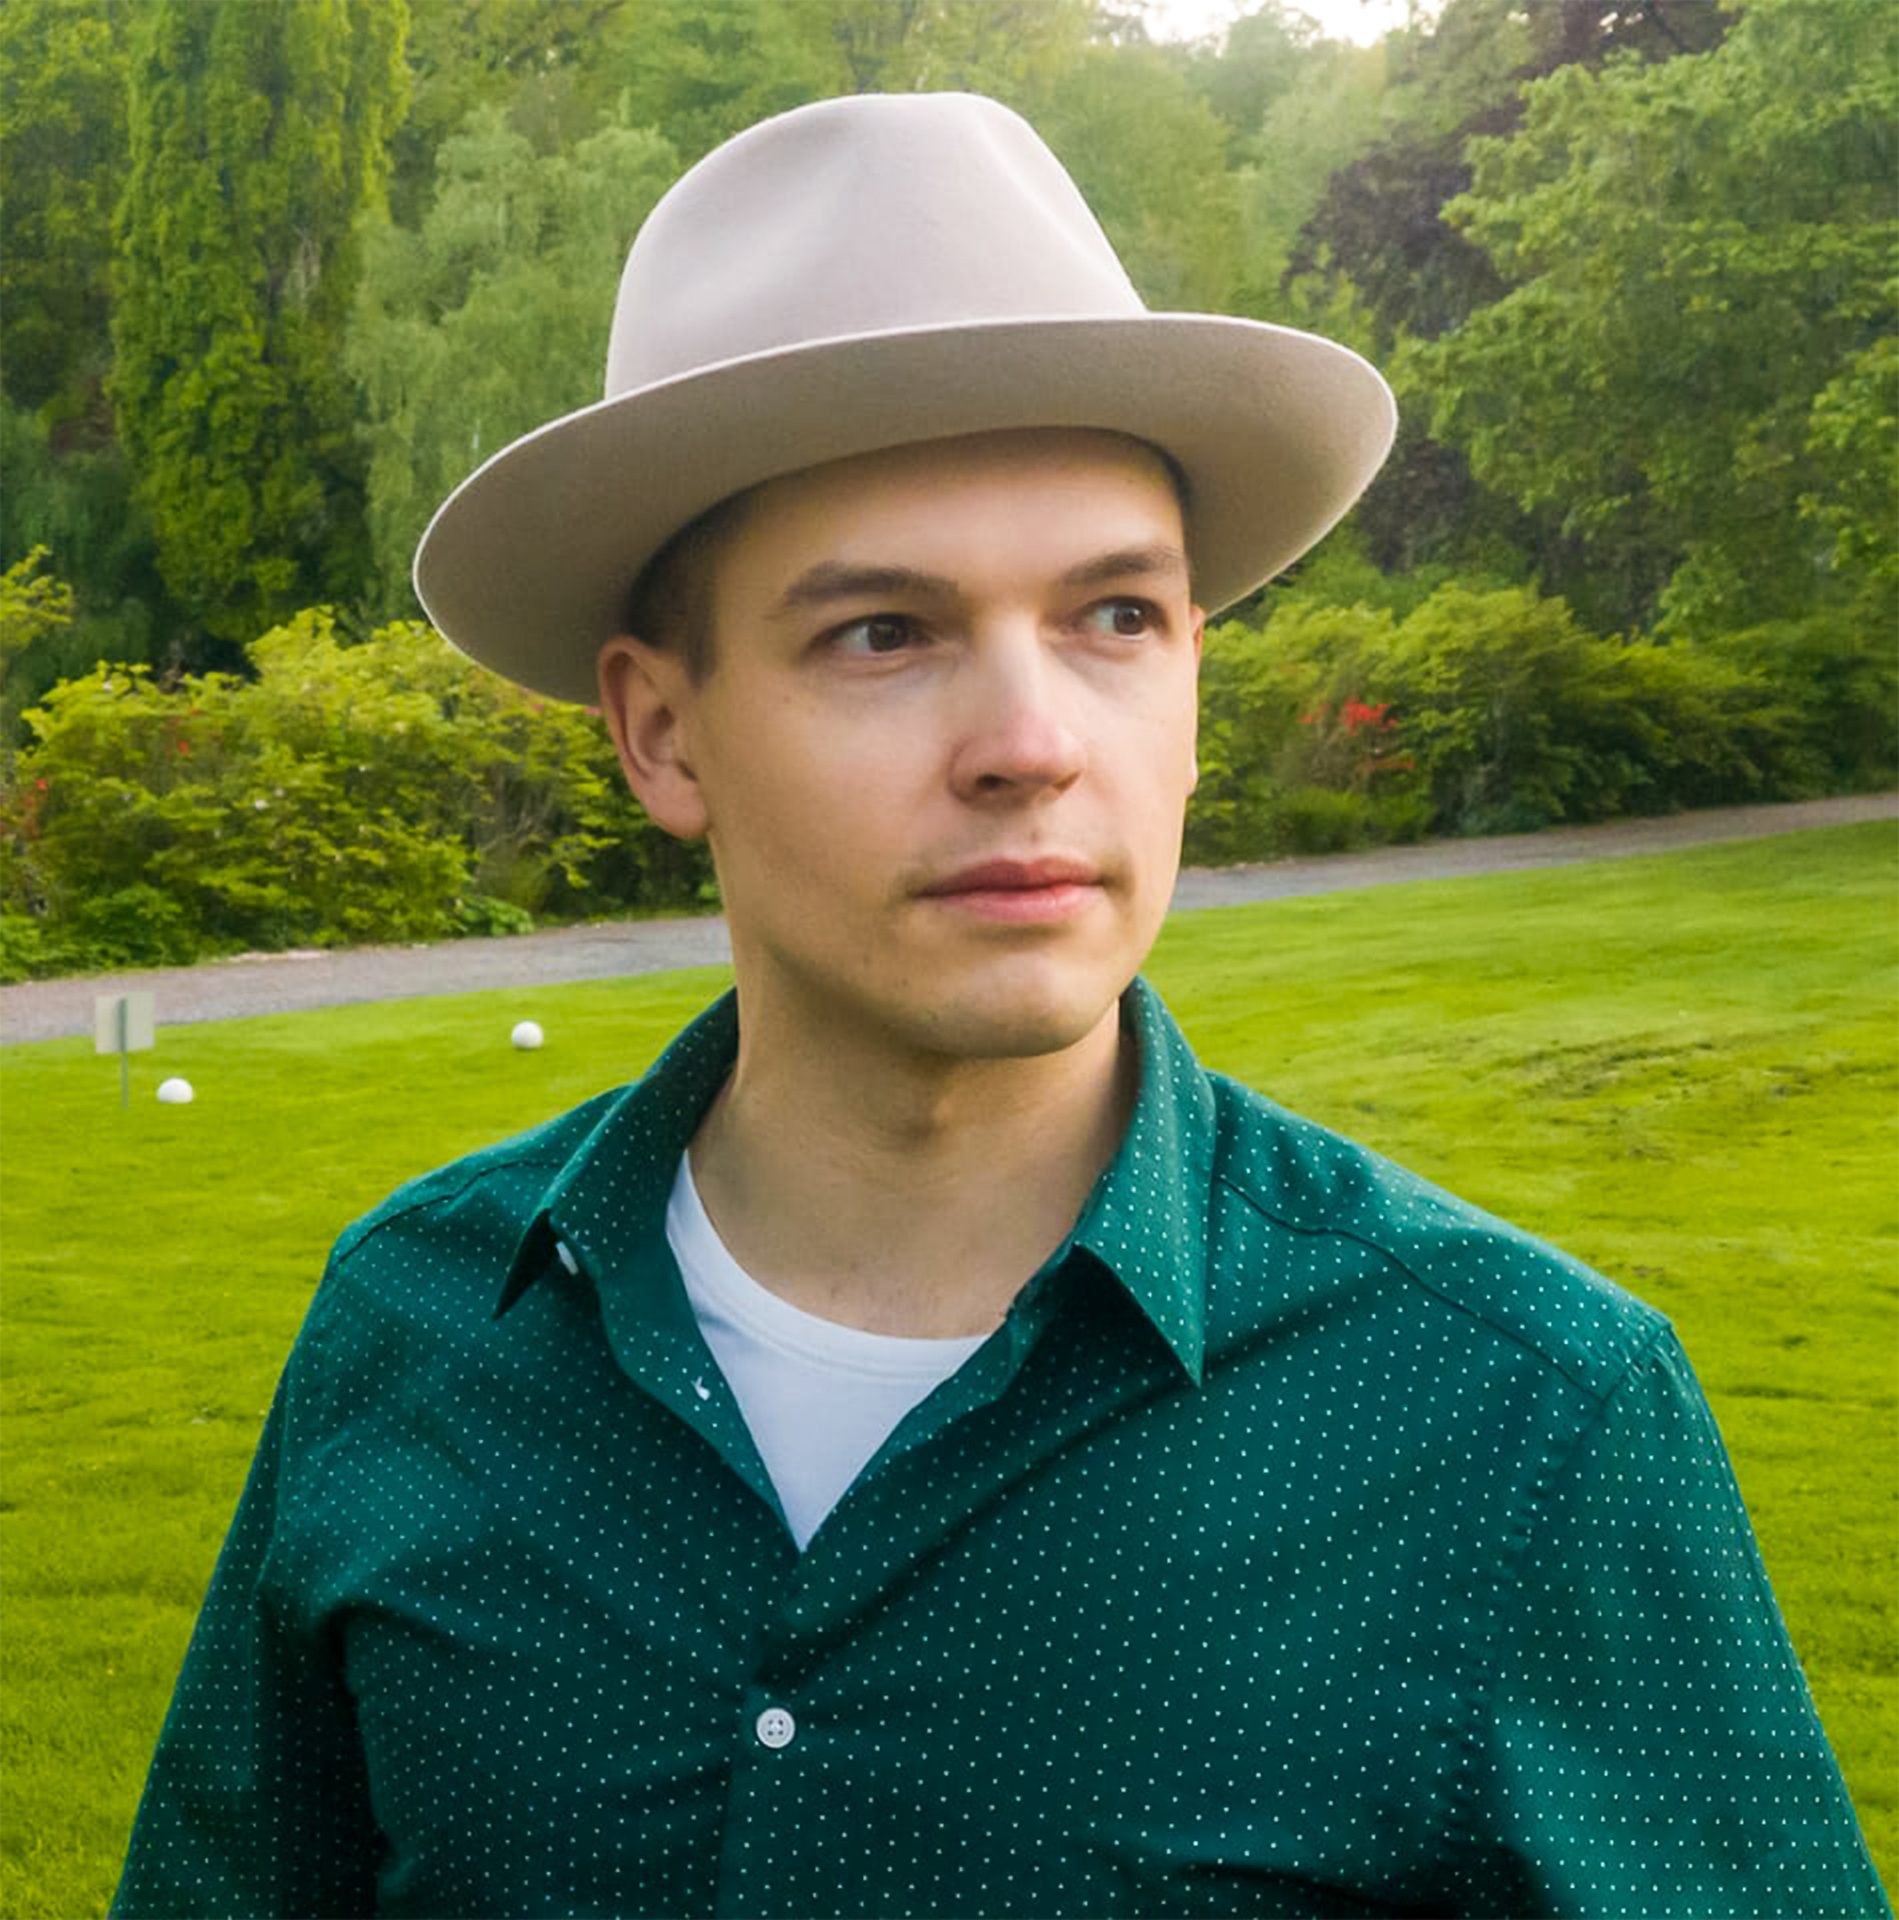 People in nature, Natural environment, Dress shirt, Face, Lip, Hat, Green, Fedora, Leaf